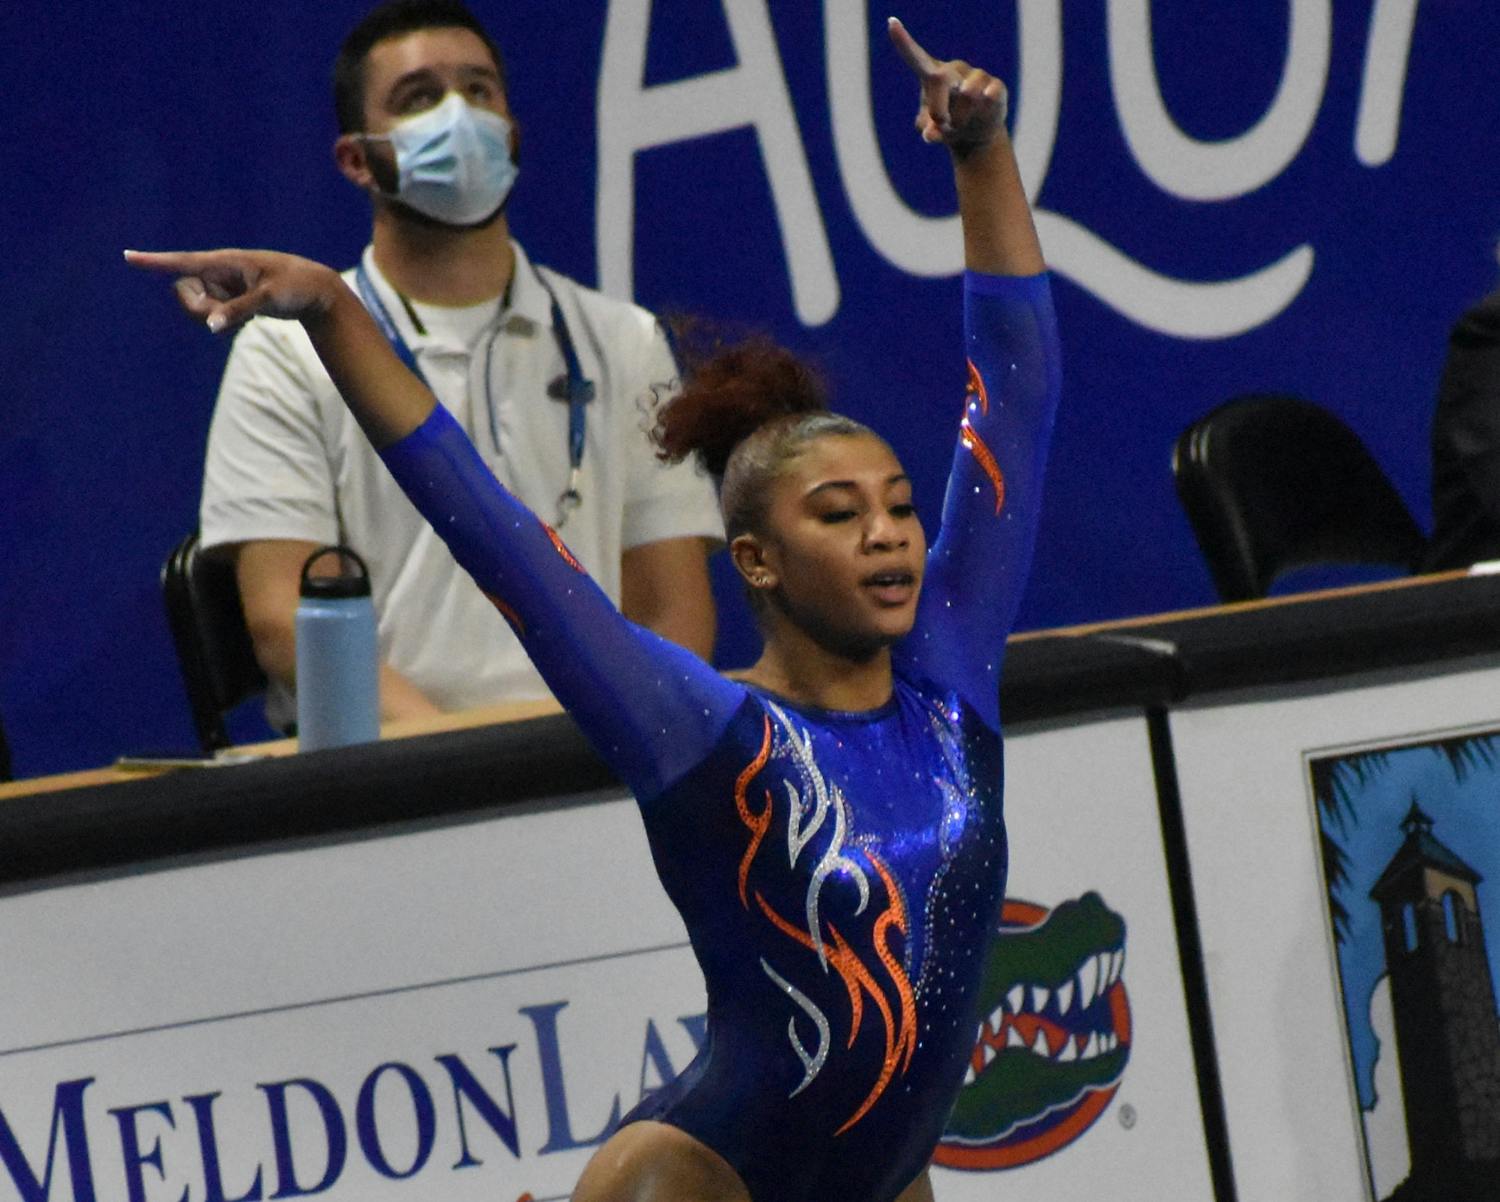 Nya Reed’s 9.95 punched her team’s ticket to the NCAA Semifinals. Photo from UF-Mizzou meet Jan. 29.